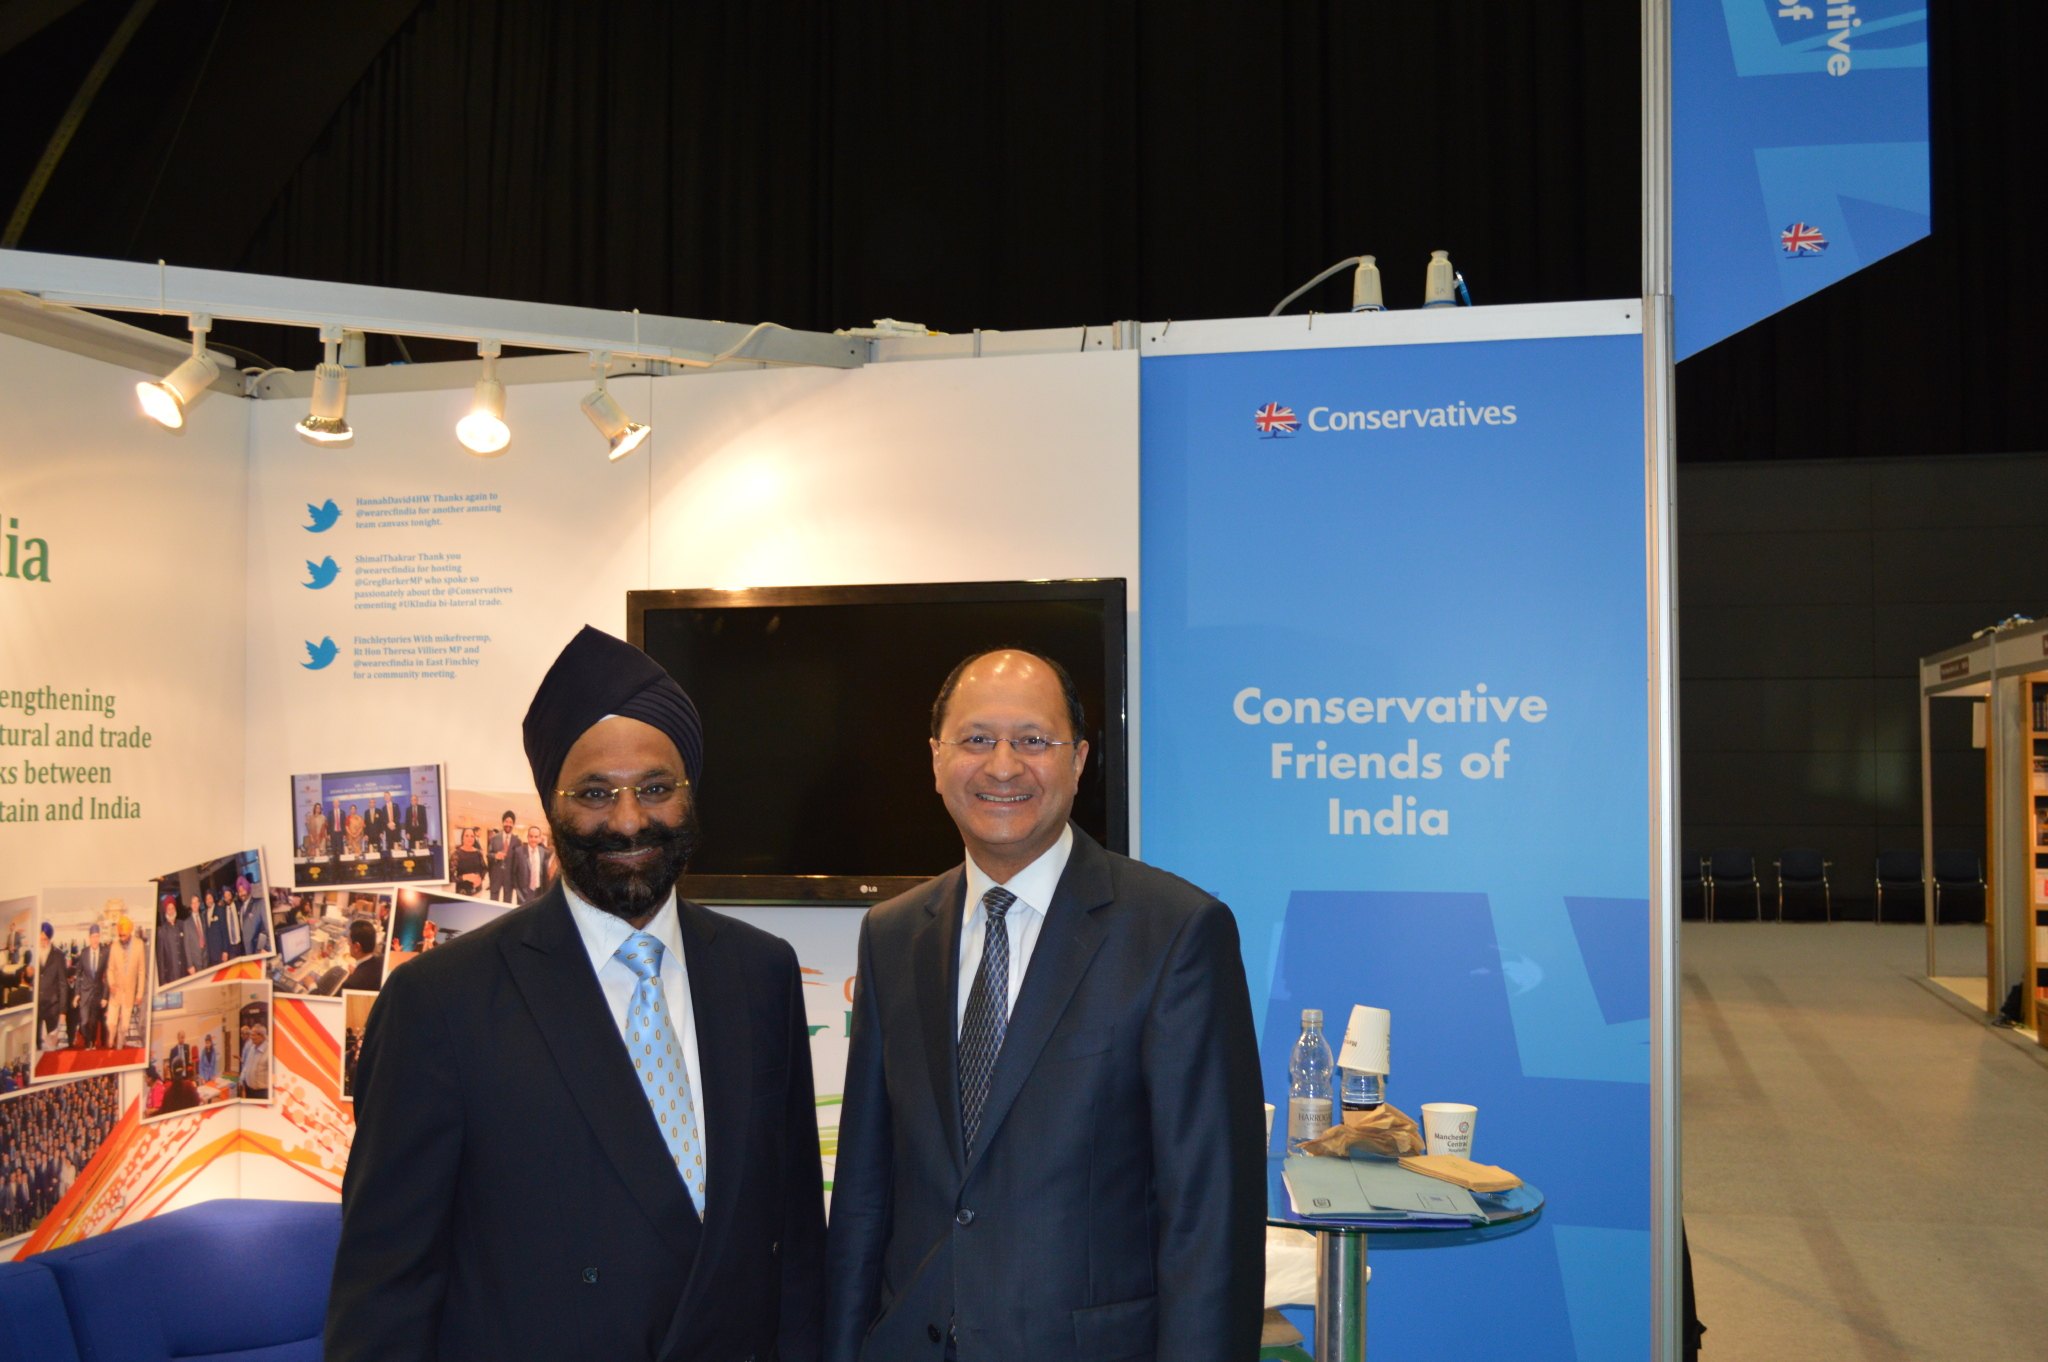 Conservative Friends of India welcomes Shailesh Vara MP as new Co-Chairman